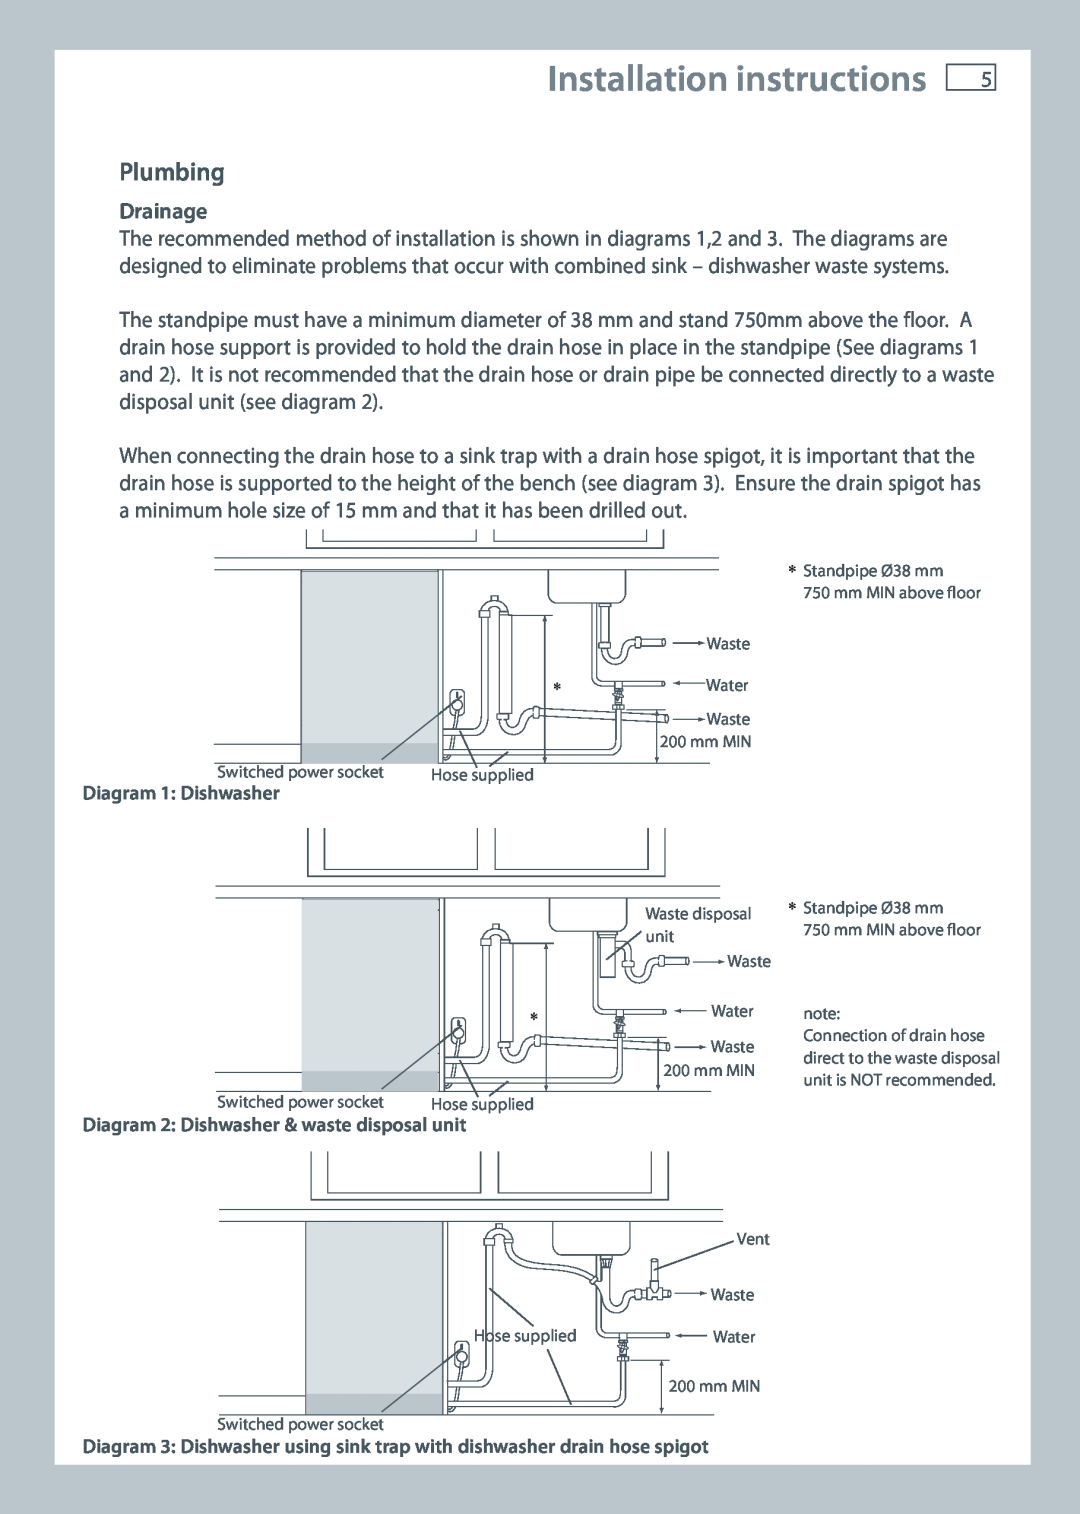 Fisher & Paykel DW60 installation instructions Installation instructions, Plumbing, Drainage 